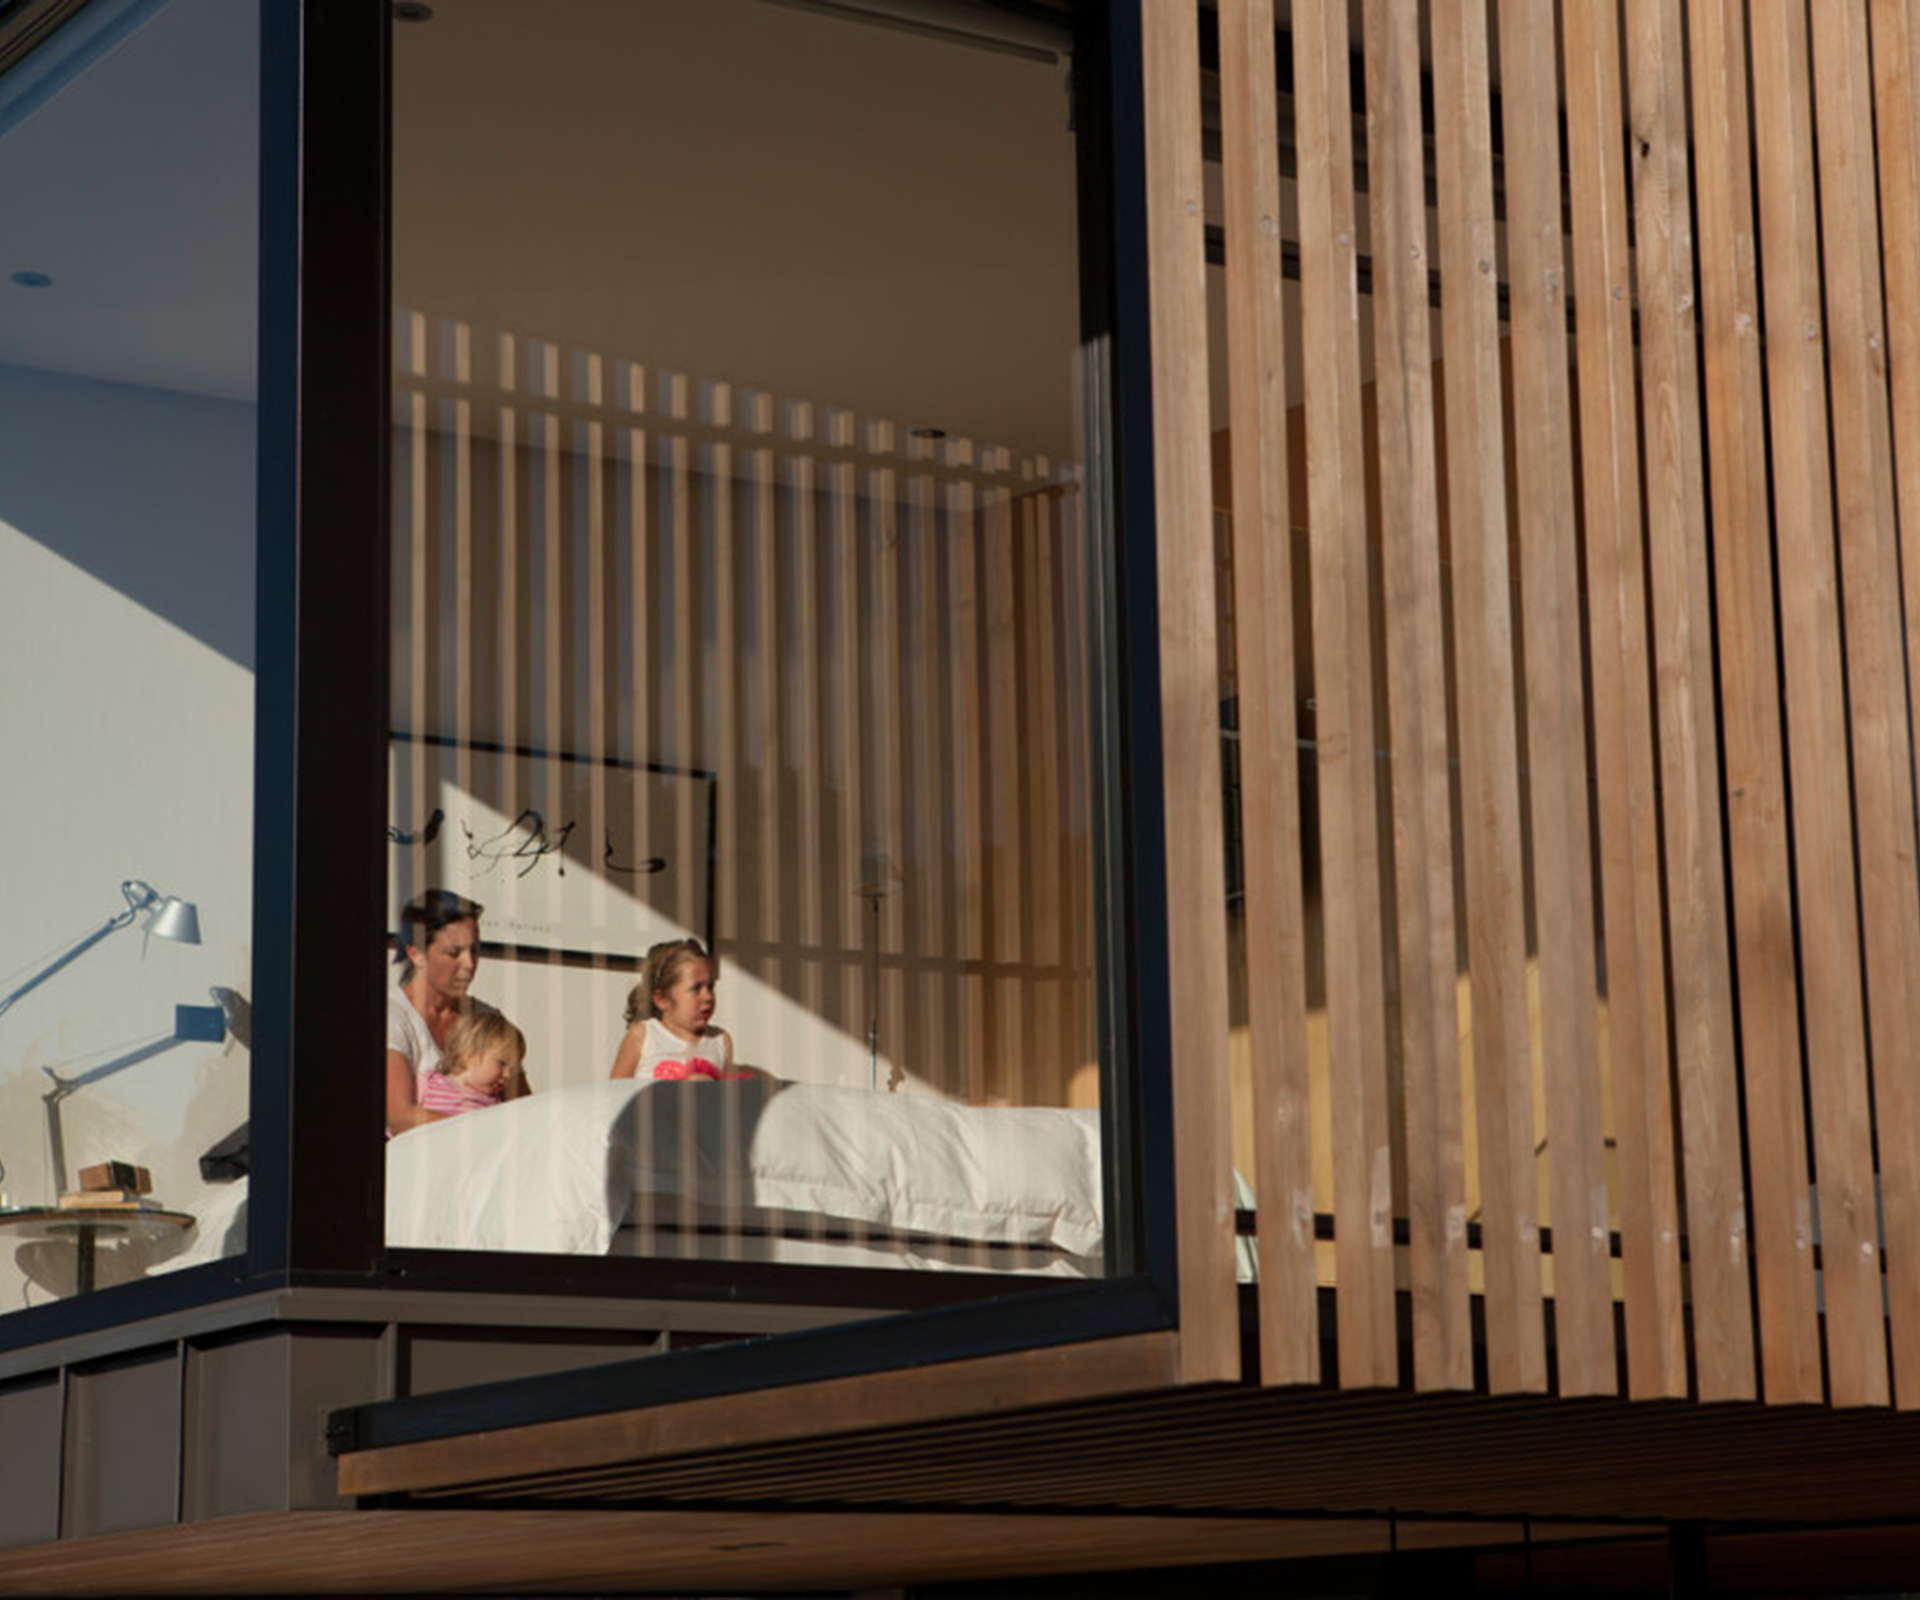 The bedrooms and bathrooms are all upstairs. Although it is small, the main bedroom feels larger because of its expansive windows. Cedar slats provide shade from the late-afternoon summer sun. 